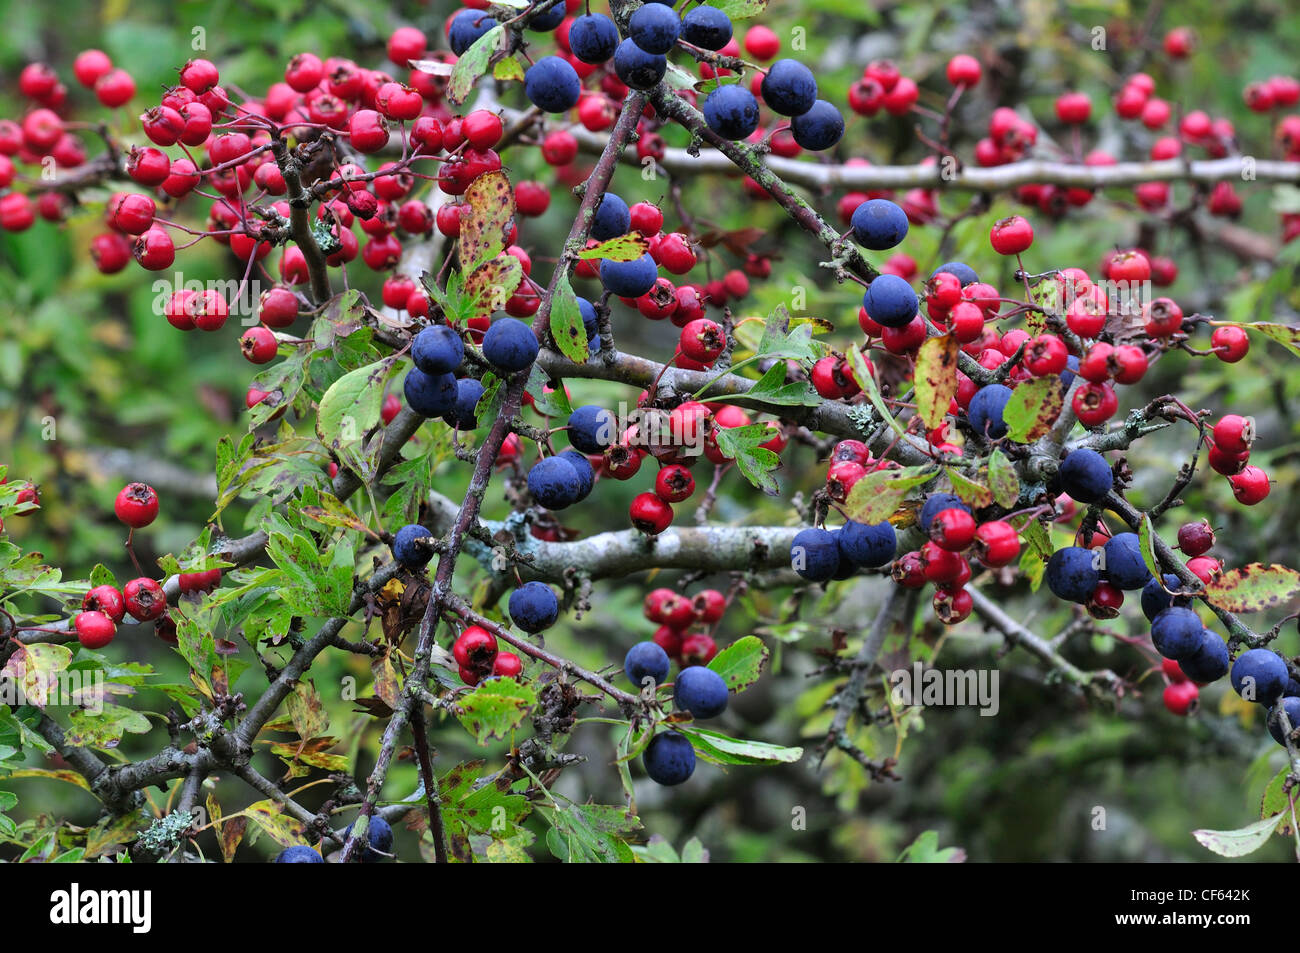 The hedgerow harvest with sloe and hawthorn berries UK Stock Photo